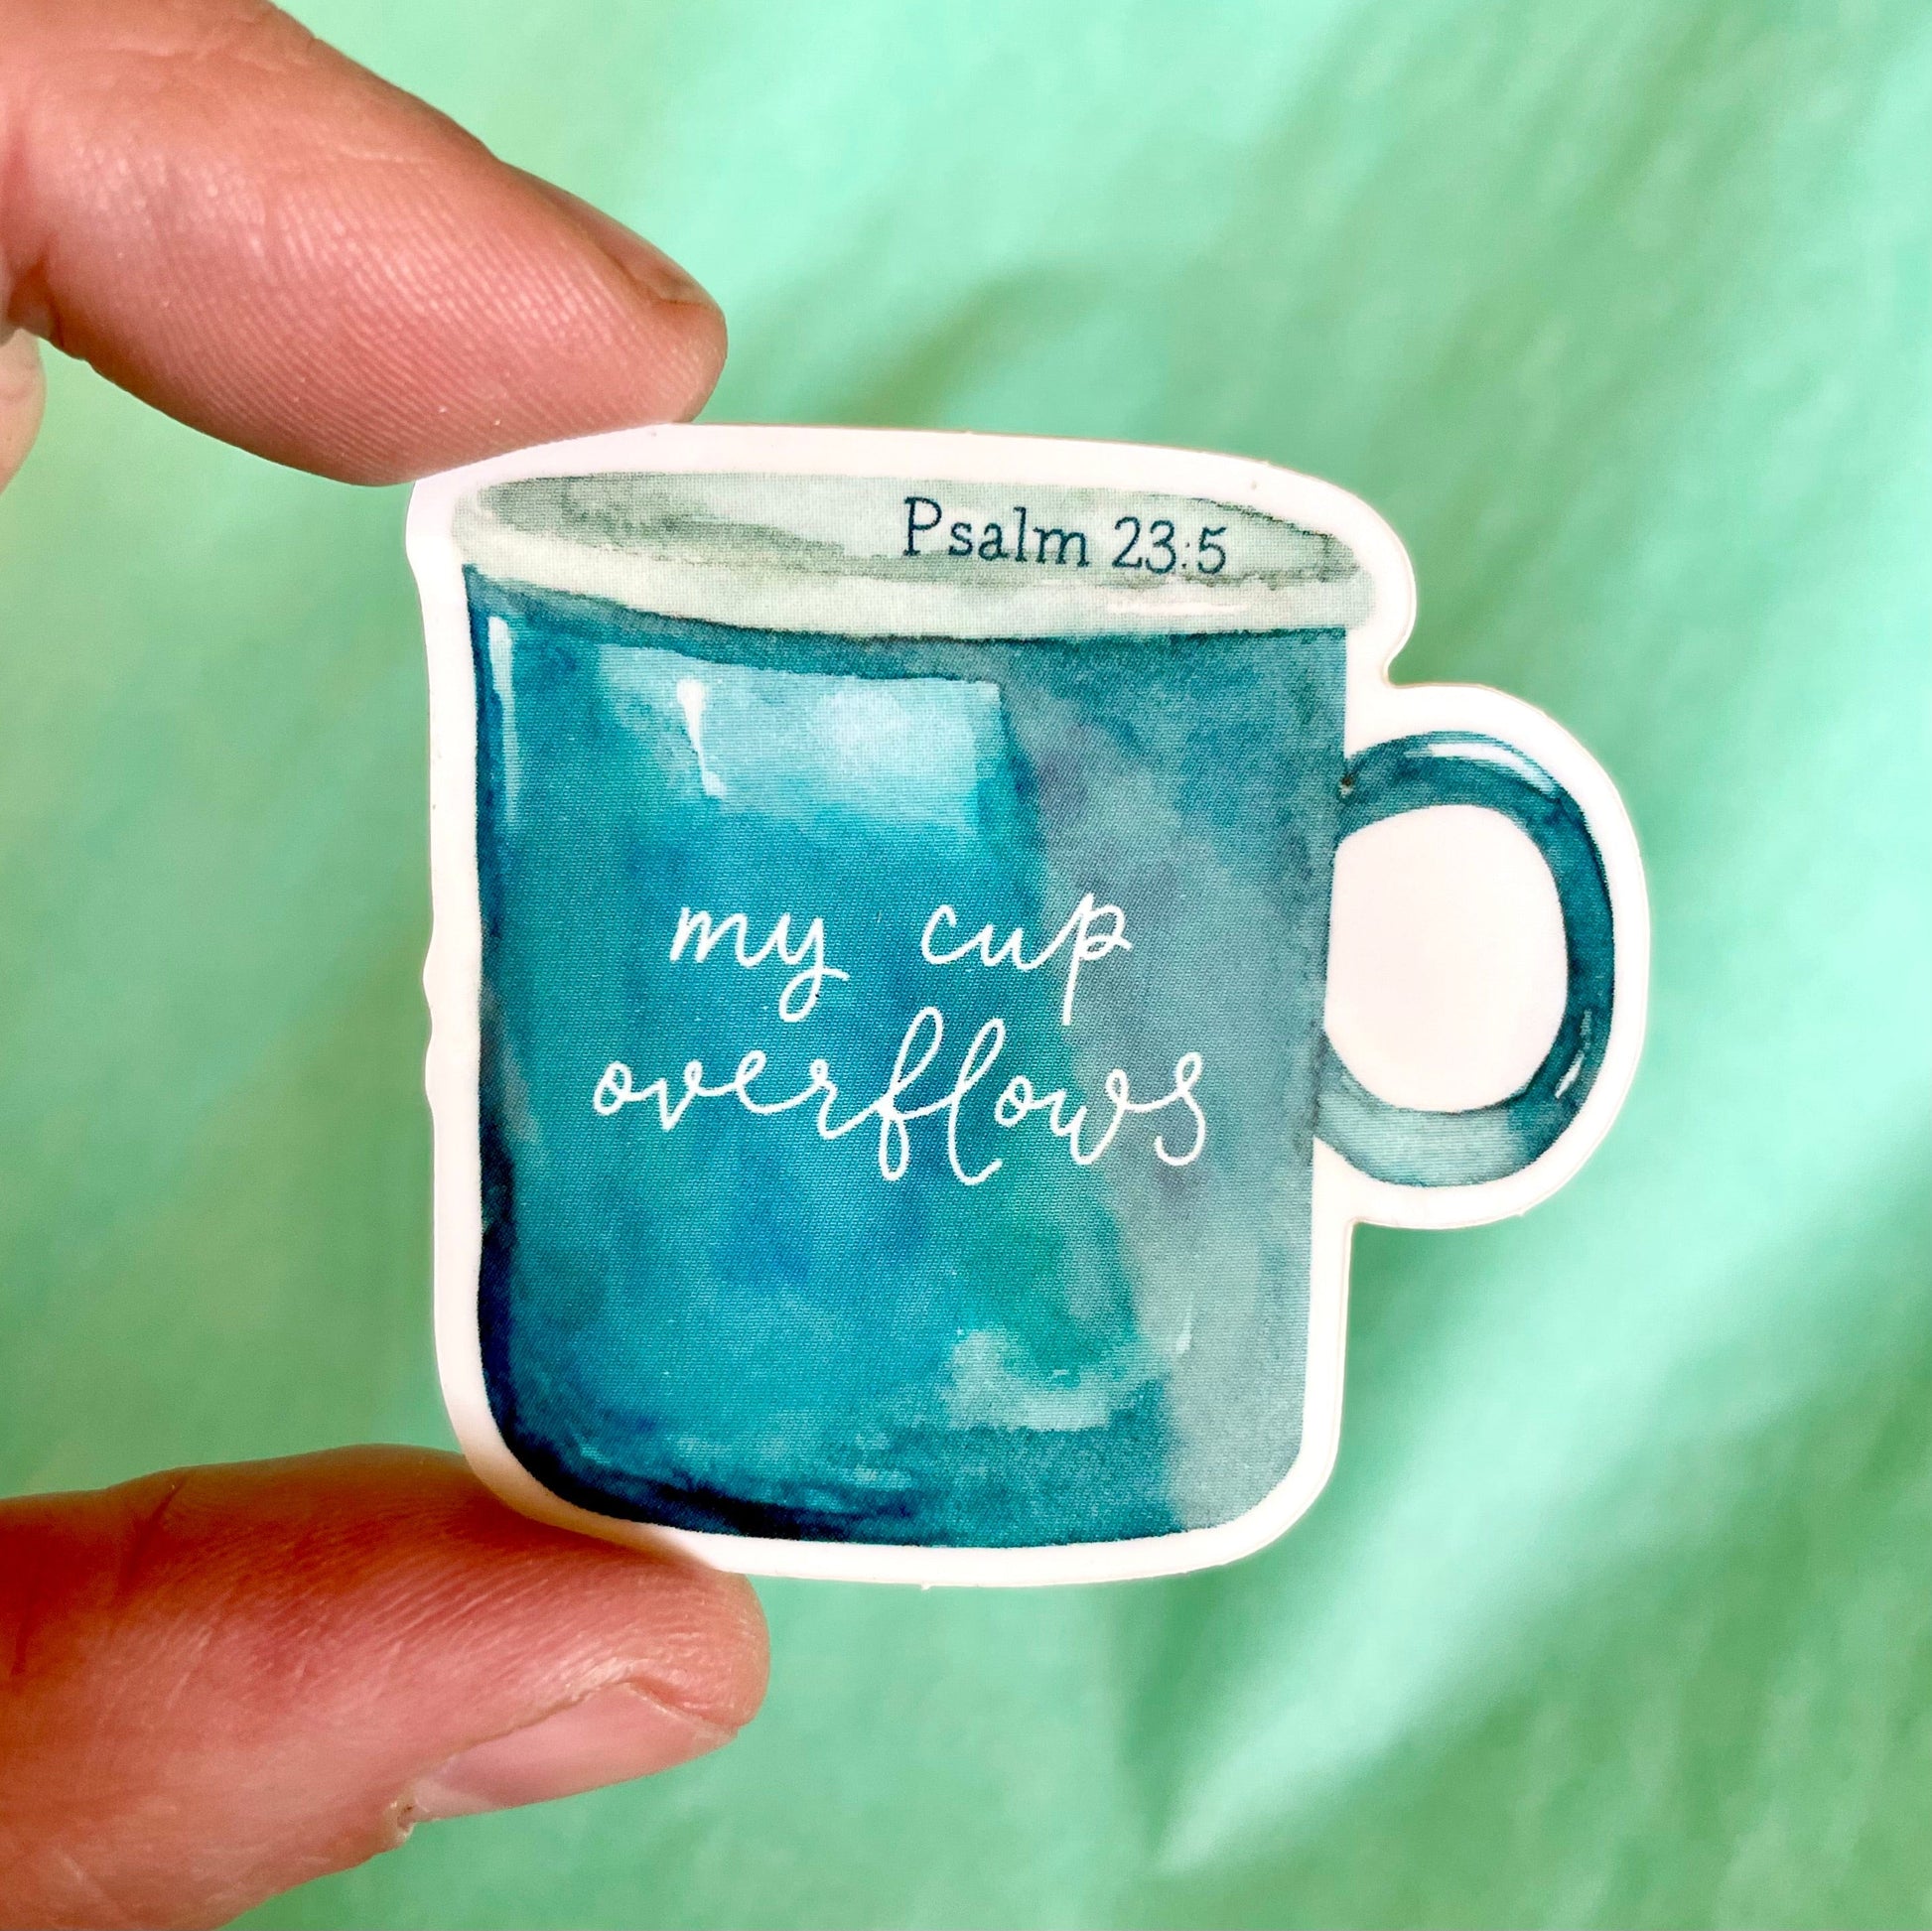 My Cup overflows - watercolour mug Christian sticker - vinyl And Hope Designs stickers